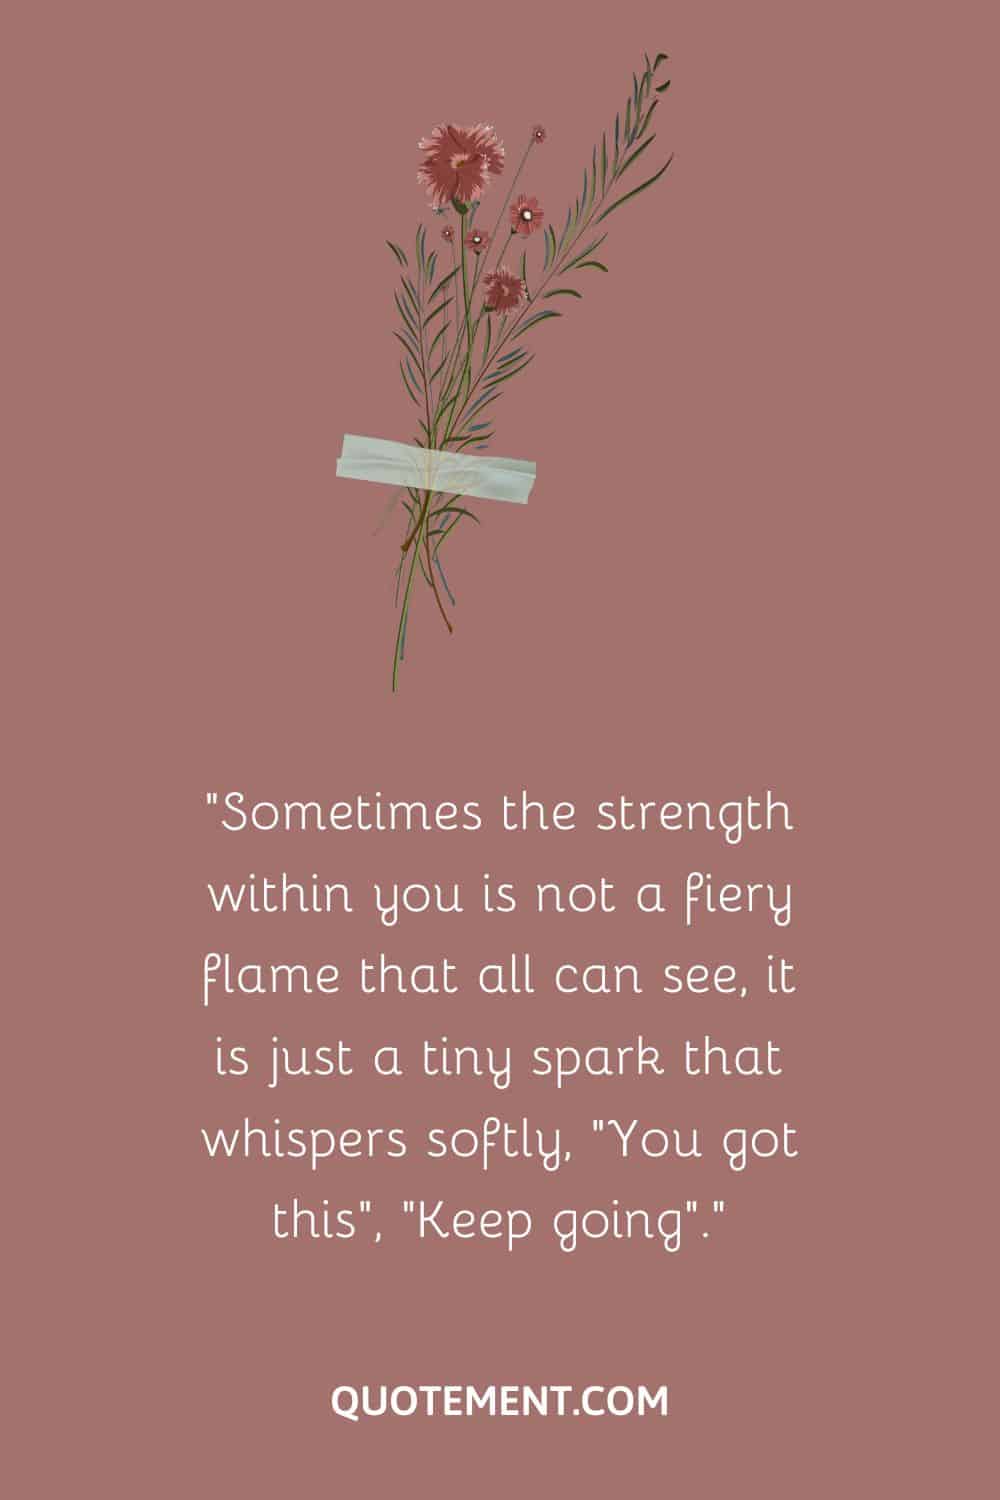 Sometimes the strength within you is not a fiery flame that all can see, it is just a tiny spark that whispers softly, “You got this”, “Keep going